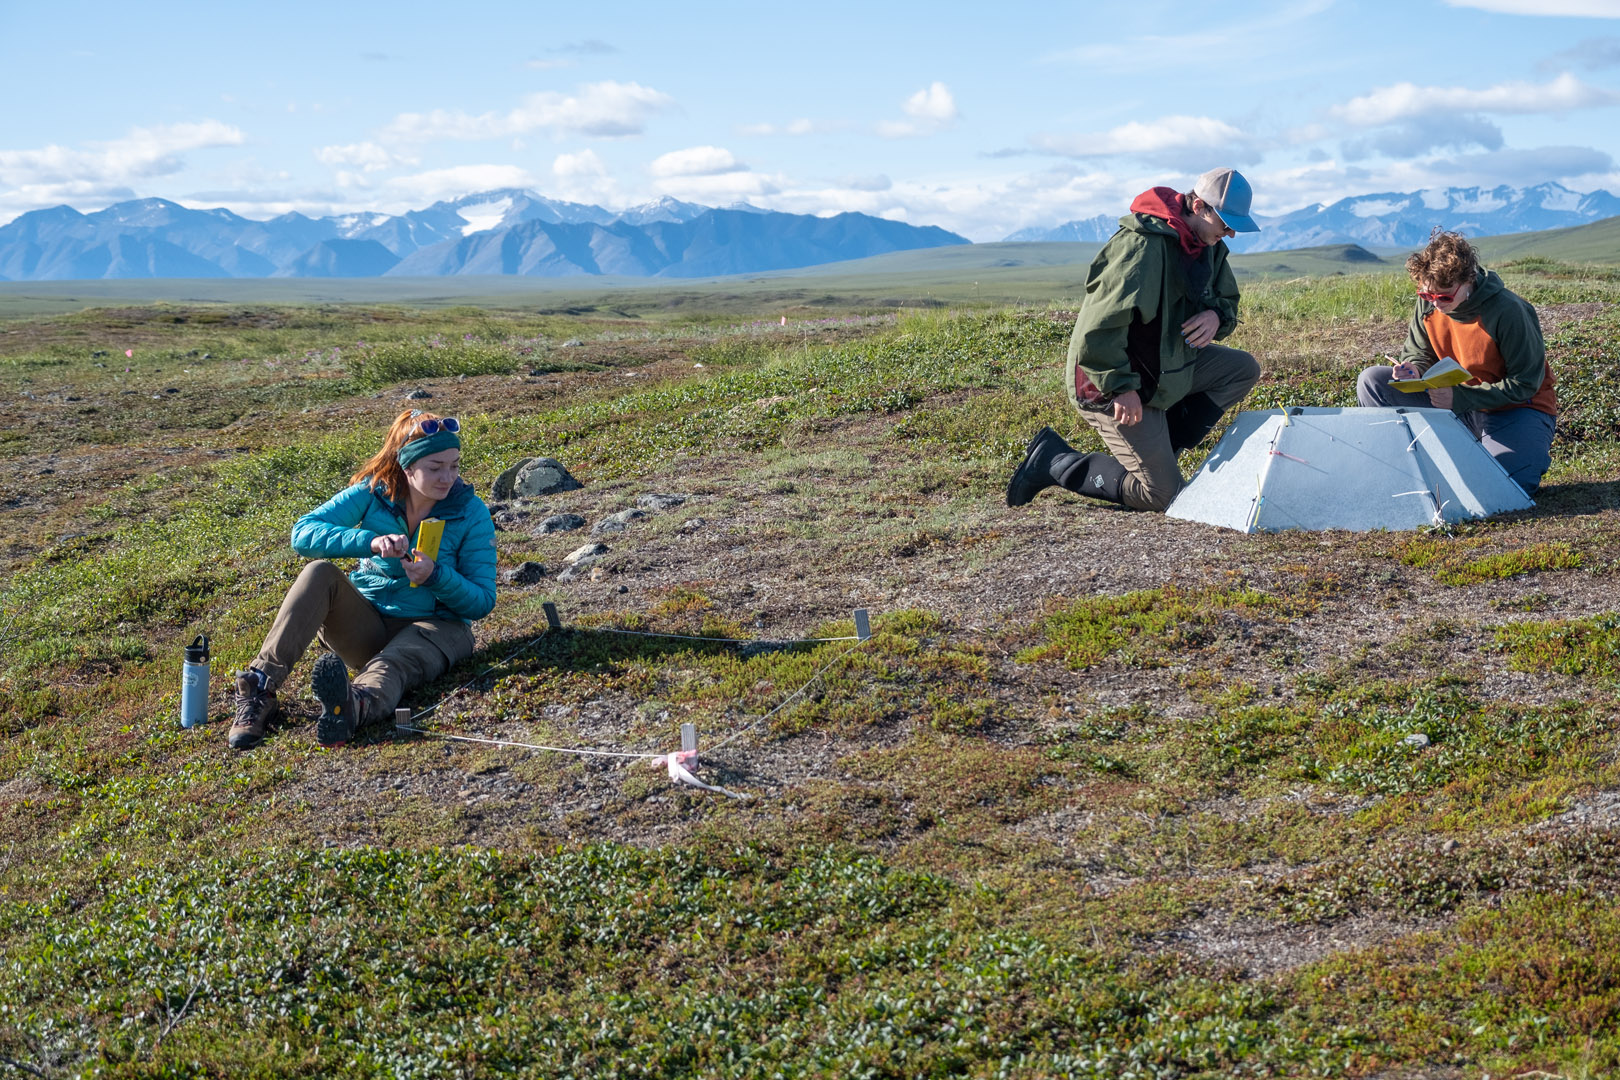 Caroline Brose '22, Zach Ginn'23, and Luca Keon '25 are pictured in front of the Brooks Range quantifying flowering in dry heath tundra. Photo taken by Sarah Ansbro in June 2022